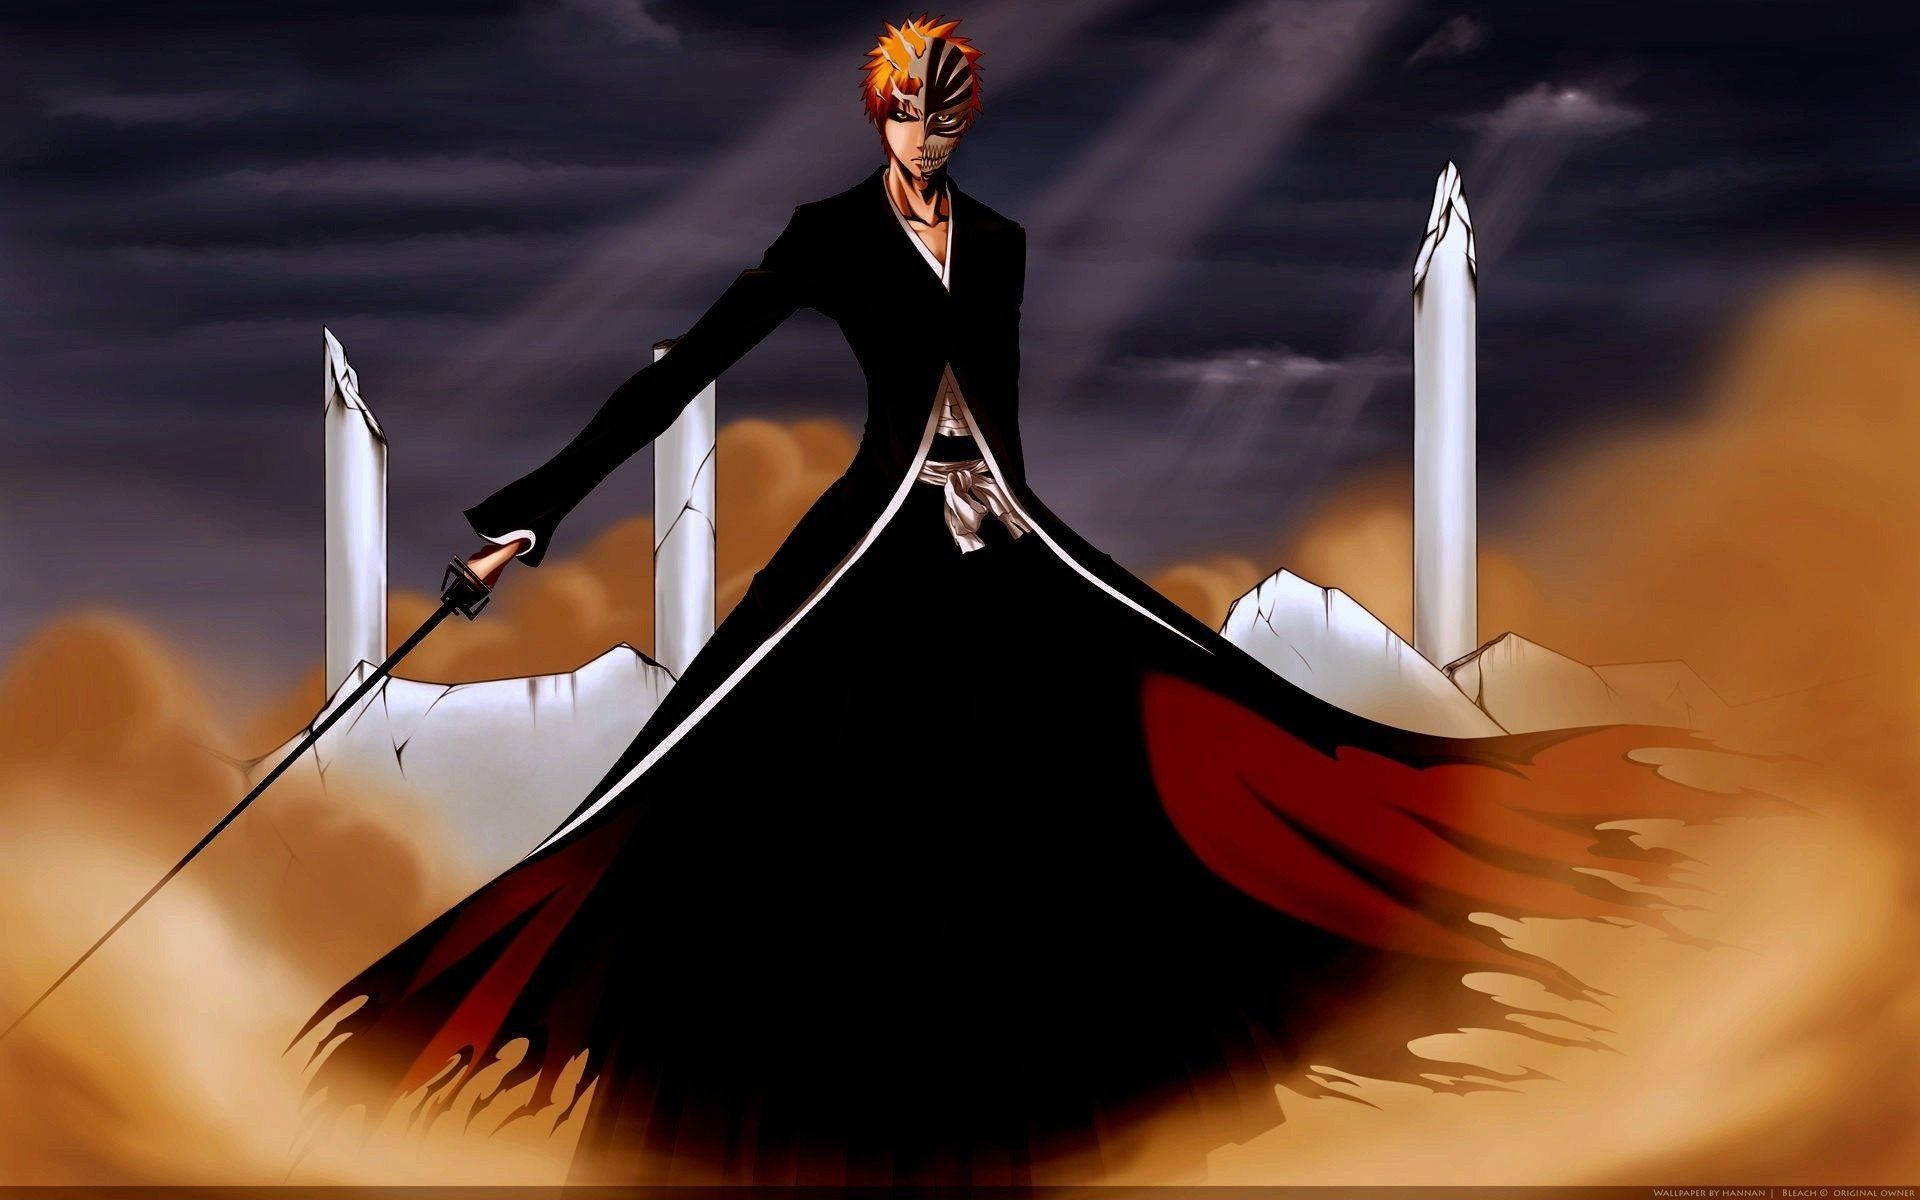 Bleach Ichigo - Ready to protect his friends and face his toughest enemies Wallpaper